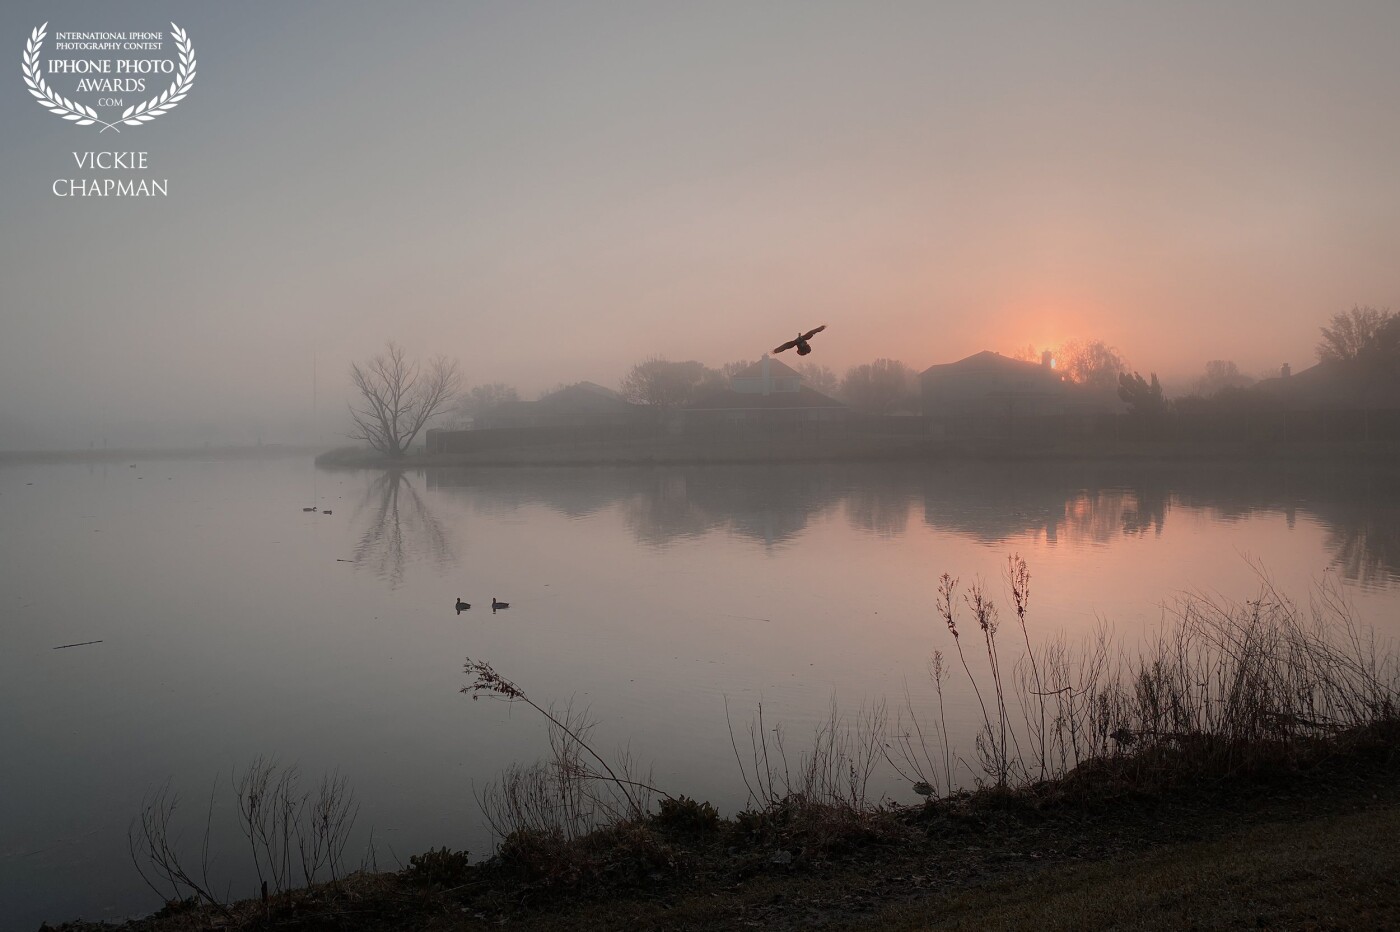 The morning fog softens the sunrise to awaken the morning slowly. Thus begins a beautiful spring day on the pond. This was captured with my iPhone 11 in Crowley, Texas in April 2022.